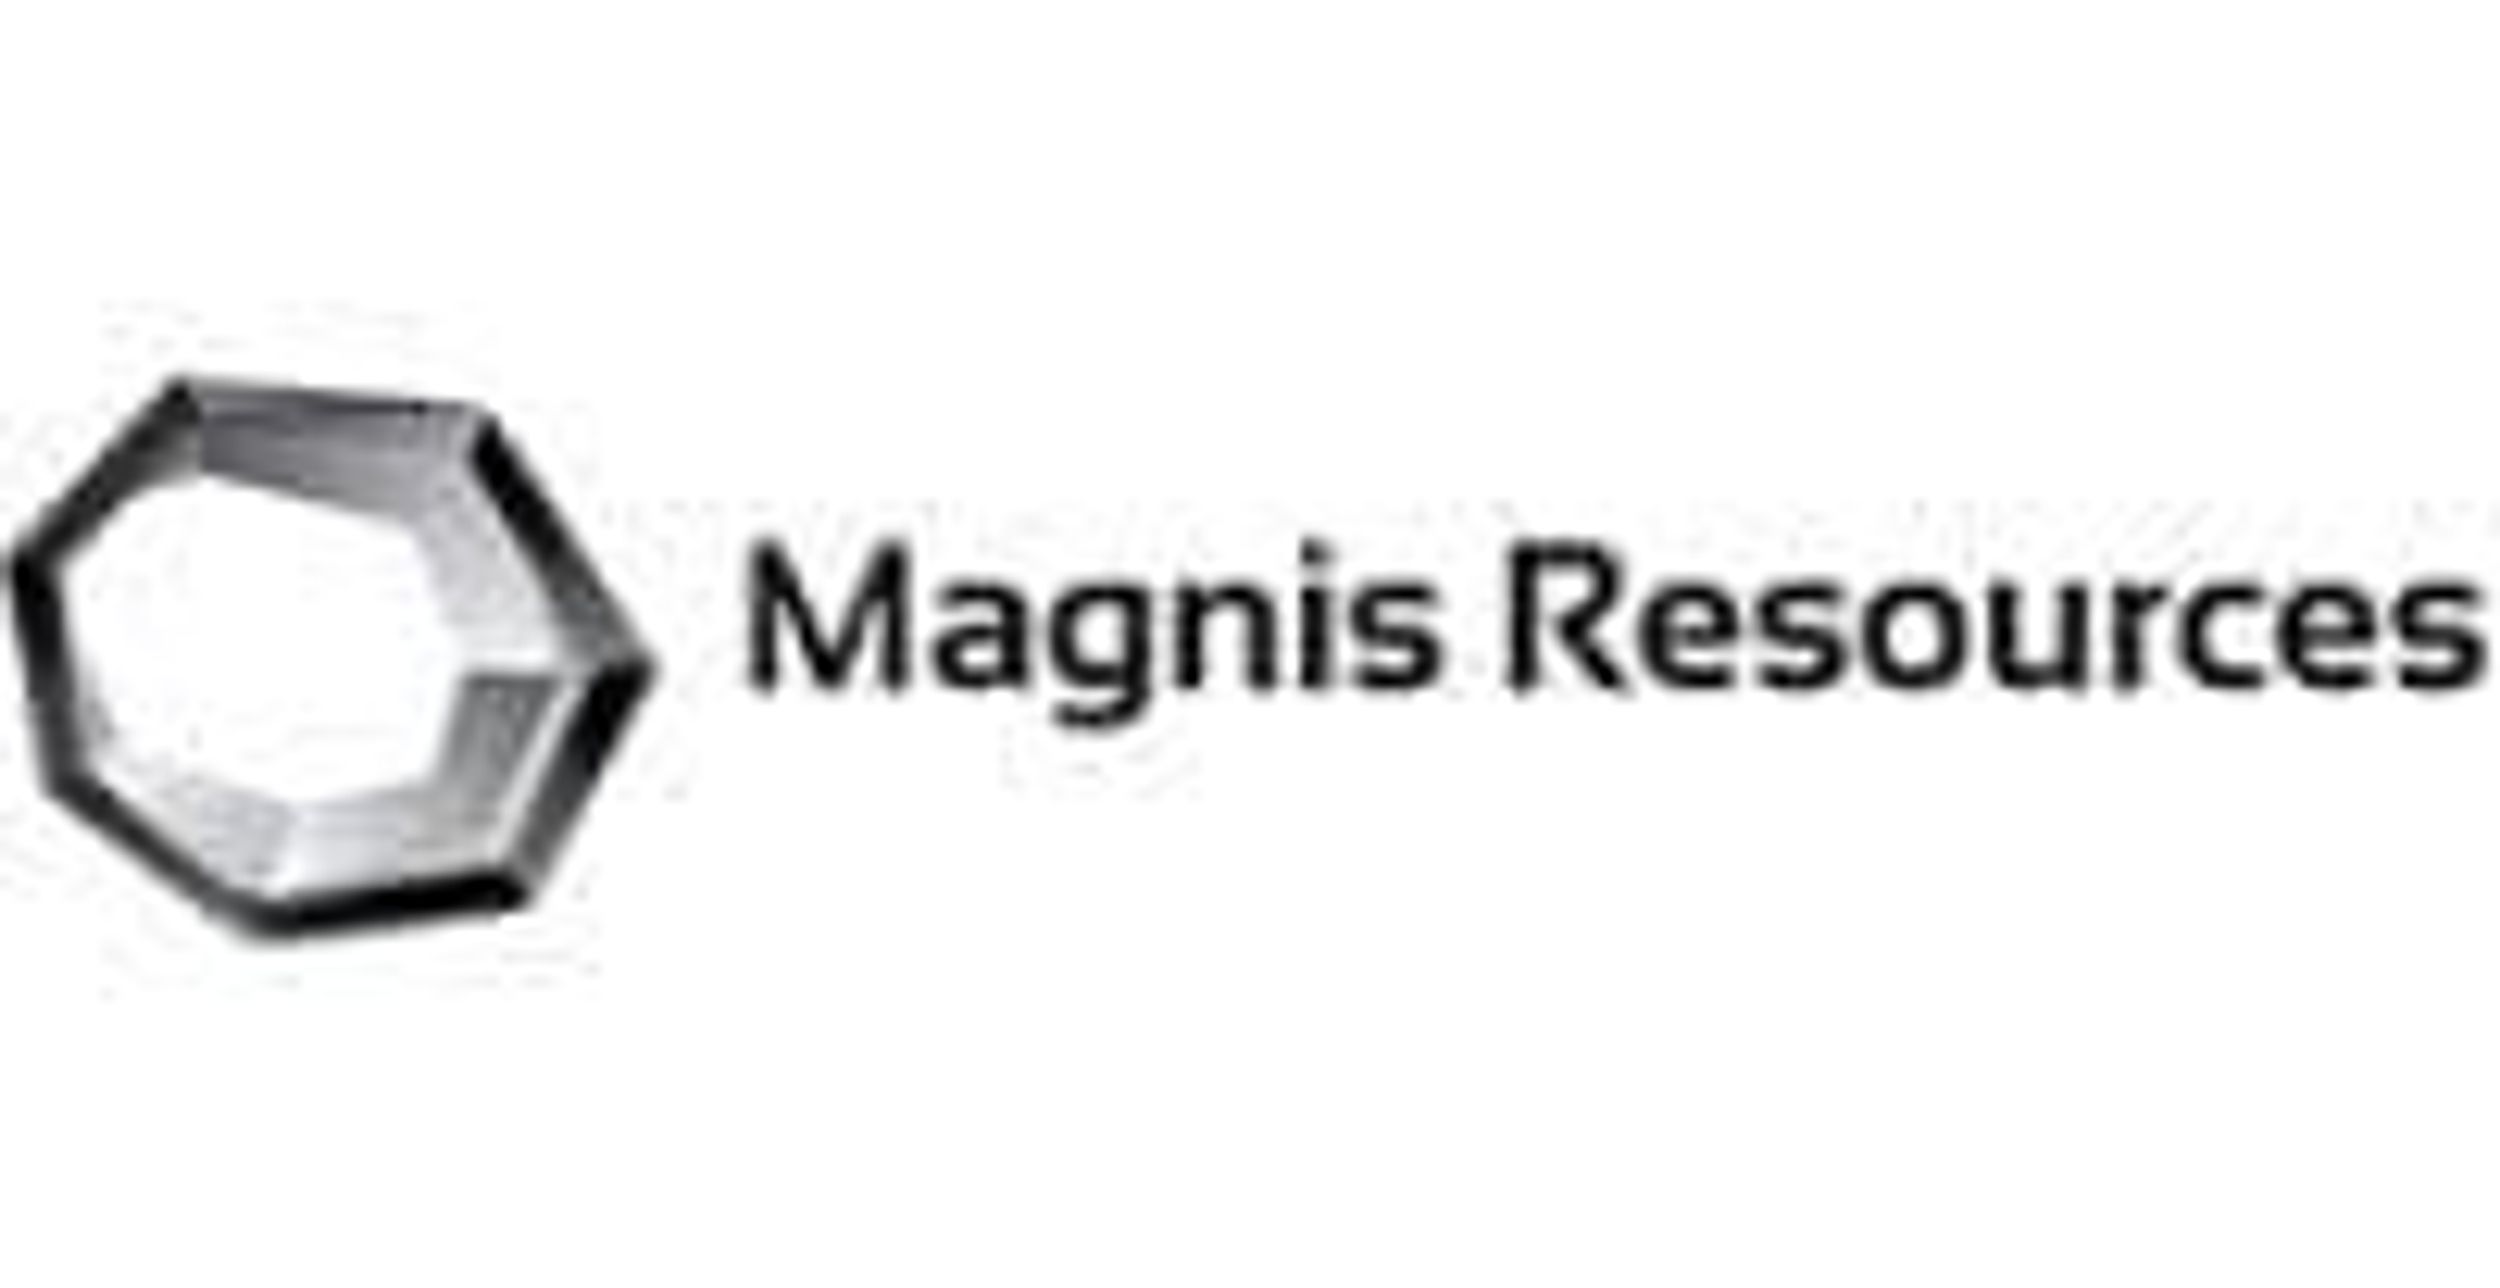 Magnis Resources’ Quarterly Report To 30 September 2018